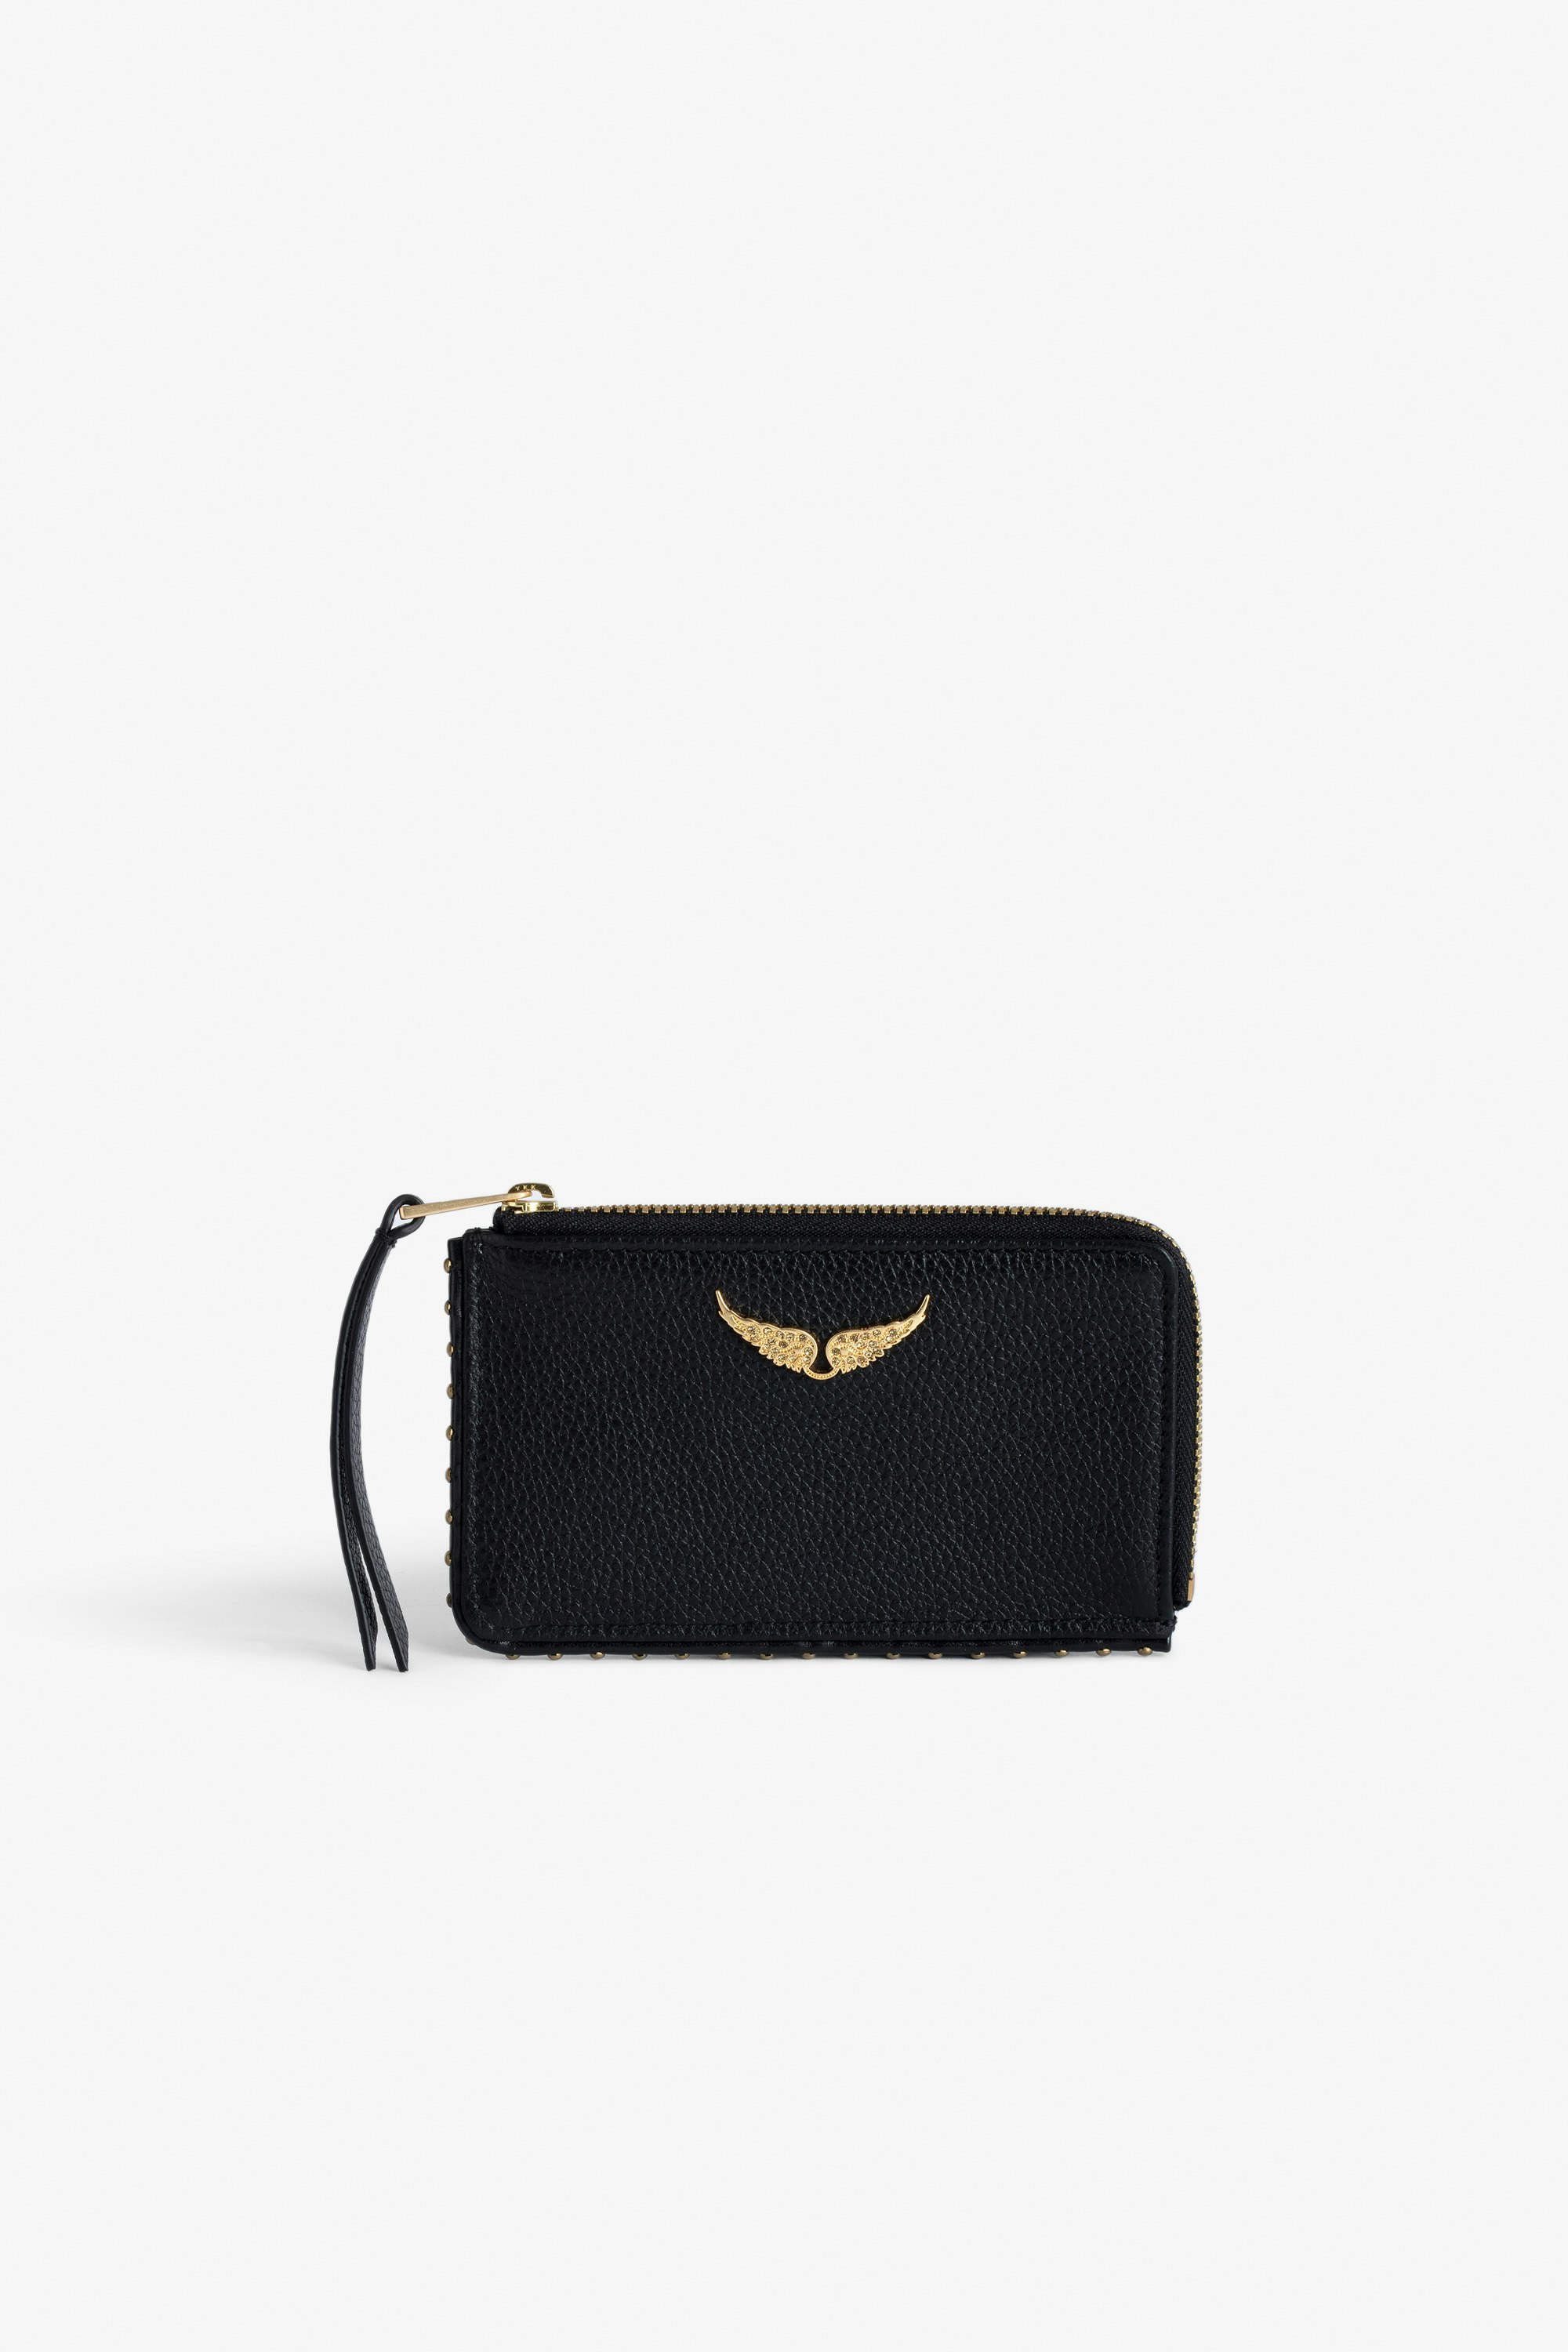 ZV Card 財布 - Women’s black grained leather card holder with studded trim and wings charm.